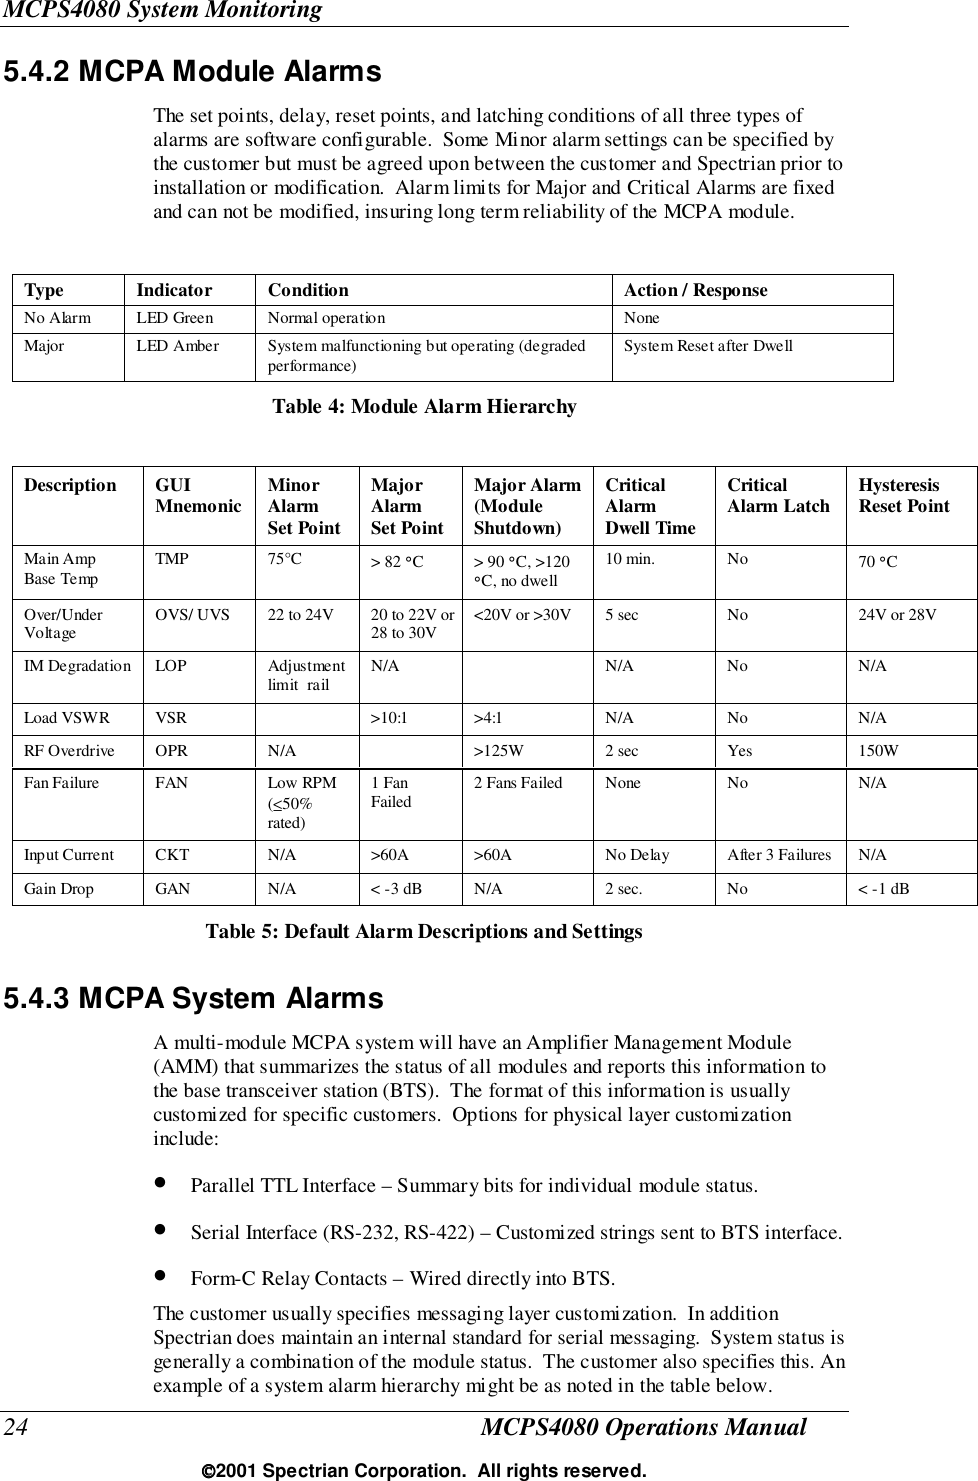 MCPS4080 System Monitoring24 MCPS4080 Operations Manual2001 Spectrian Corporation.  All rights reserved.5.4.2 MCPA Module AlarmsThe set points, delay, reset points, and latching conditions of all three types ofalarms are software configurable.  Some Minor alarm settings can be specified bythe customer but must be agreed upon between the customer and Spectrian prior toinstallation or modification.  Alarm limits for Major and Critical Alarms are fixedand can not be modified, insuring long term reliability of the MCPA module.Type Indicator Condition Action / ResponseNo Alarm LED Green Normal operation NoneMajor LED Amber System malfunctioning but operating (degradedperformance) System Reset after DwellTable 4: Module Alarm HierarchyDescription GUIMnemonic MinorAlarmSet PointMajorAlarmSet PointMajor Alarm(ModuleShutdown)CriticalAlarmDwell TimeCriticalAlarm Latch HysteresisReset PointMain AmpBase Temp TMP 75°C &gt; 82 °C &gt; 90 °C, &gt;120°C, no dwell10 min. No 70 °COver/UnderVoltage OVS/ UVS 22 to 24V 20 to 22V or28 to 30V &lt;20V or &gt;30V 5 sec No 24V or 28VIM Degradation LOP Adjustmentlimit  rail N/A N/A No N/ALoad VSWR VSR &gt;10:1 &gt;4:1 N/A No N/ARF Overdrive OPR N/A &gt;125W 2 sec Yes 150WFan Failure FAN Low RPM(≤50%rated)1 FanFailed 2 Fans Failed None No N/AInput Current CKT N/A &gt;60A &gt;60A No Delay After 3 Failures N/AGain Drop GAN N/A &lt; -3 dB N/A 2 sec. No &lt; -1 dBTable 5: Default Alarm Descriptions and Settings5.4.3 MCPA System AlarmsA multi-module MCPA system will have an Amplifier Management Module(AMM) that summarizes the status of all modules and reports this information tothe base transceiver station (BTS).  The format of this information is usuallycustomized for specific customers.  Options for physical layer customizationinclude:• Parallel TTL Interface – Summary bits for individual module status.• Serial Interface (RS-232, RS-422) – Customized strings sent to BTS interface.• Form-C Relay Contacts – Wired directly into BTS.The customer usually specifies messaging layer customization.  In additionSpectrian does maintain an internal standard for serial messaging.  System status isgenerally a combination of the module status.  The customer also specifies this. Anexample of a system alarm hierarchy might be as noted in the table below.